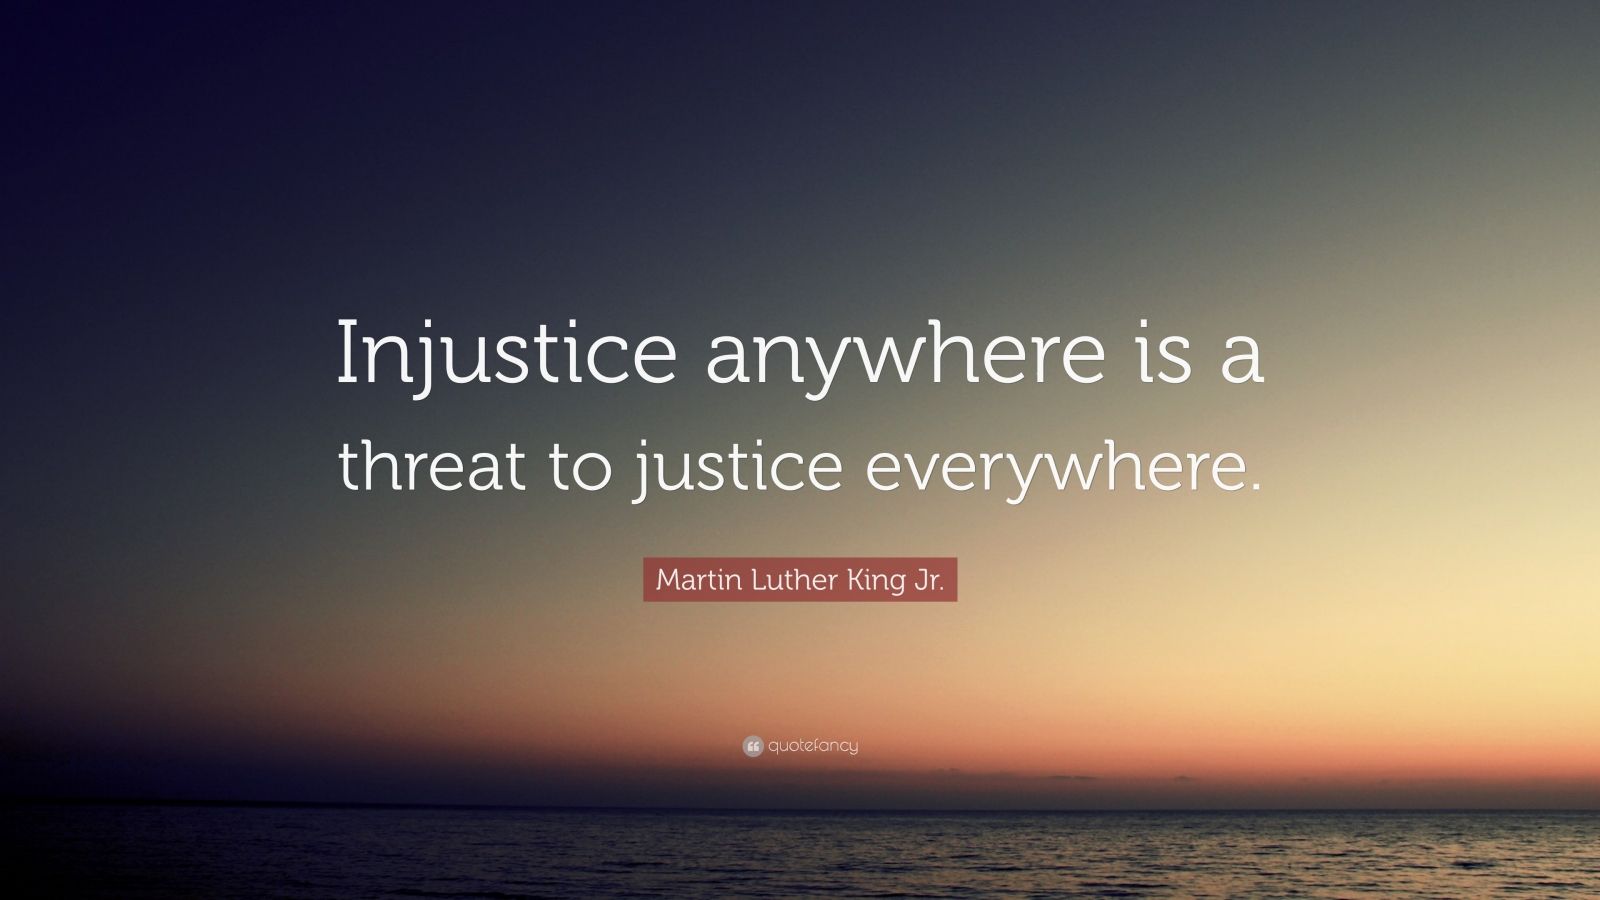 Martin Luther King Jr. Quote: “Injustice anywhere is a threat to ...